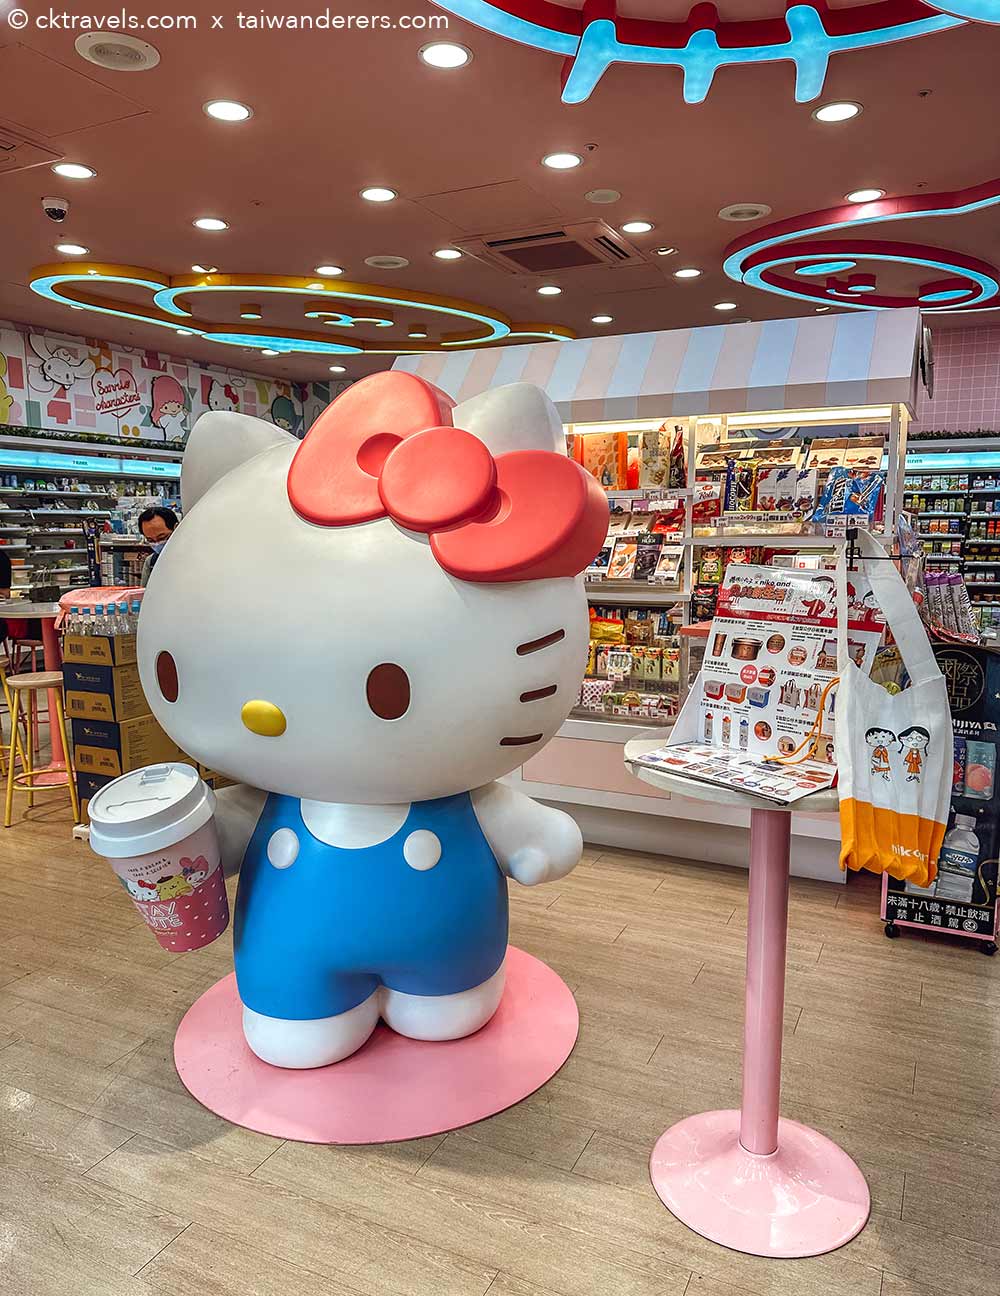 Hello Kitty Taiwan 7-Eleven themed stores